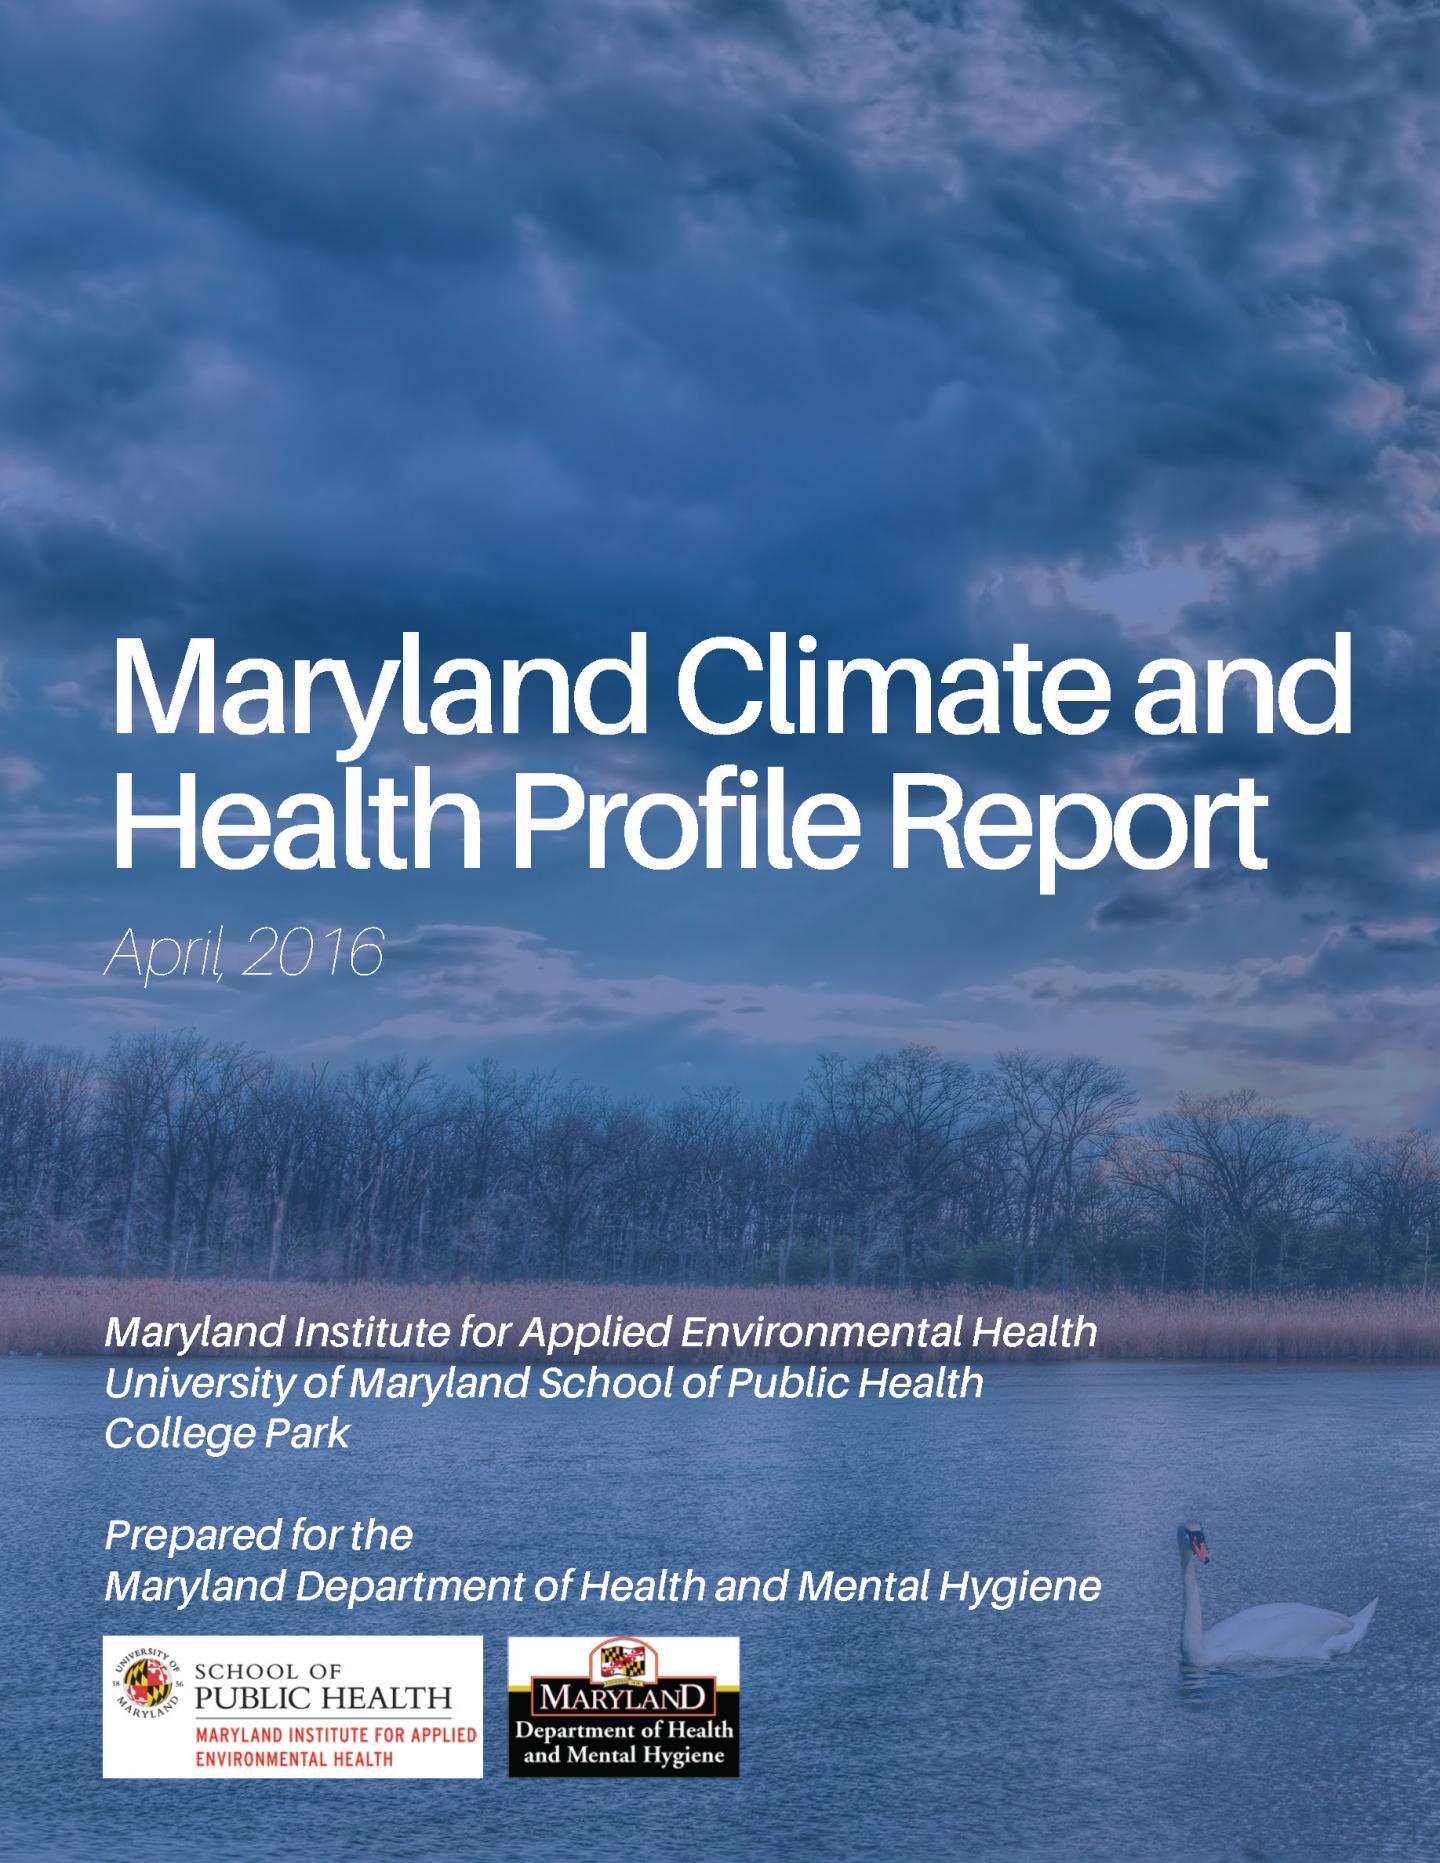 Maryland Climate and Health Profile report, April 2016